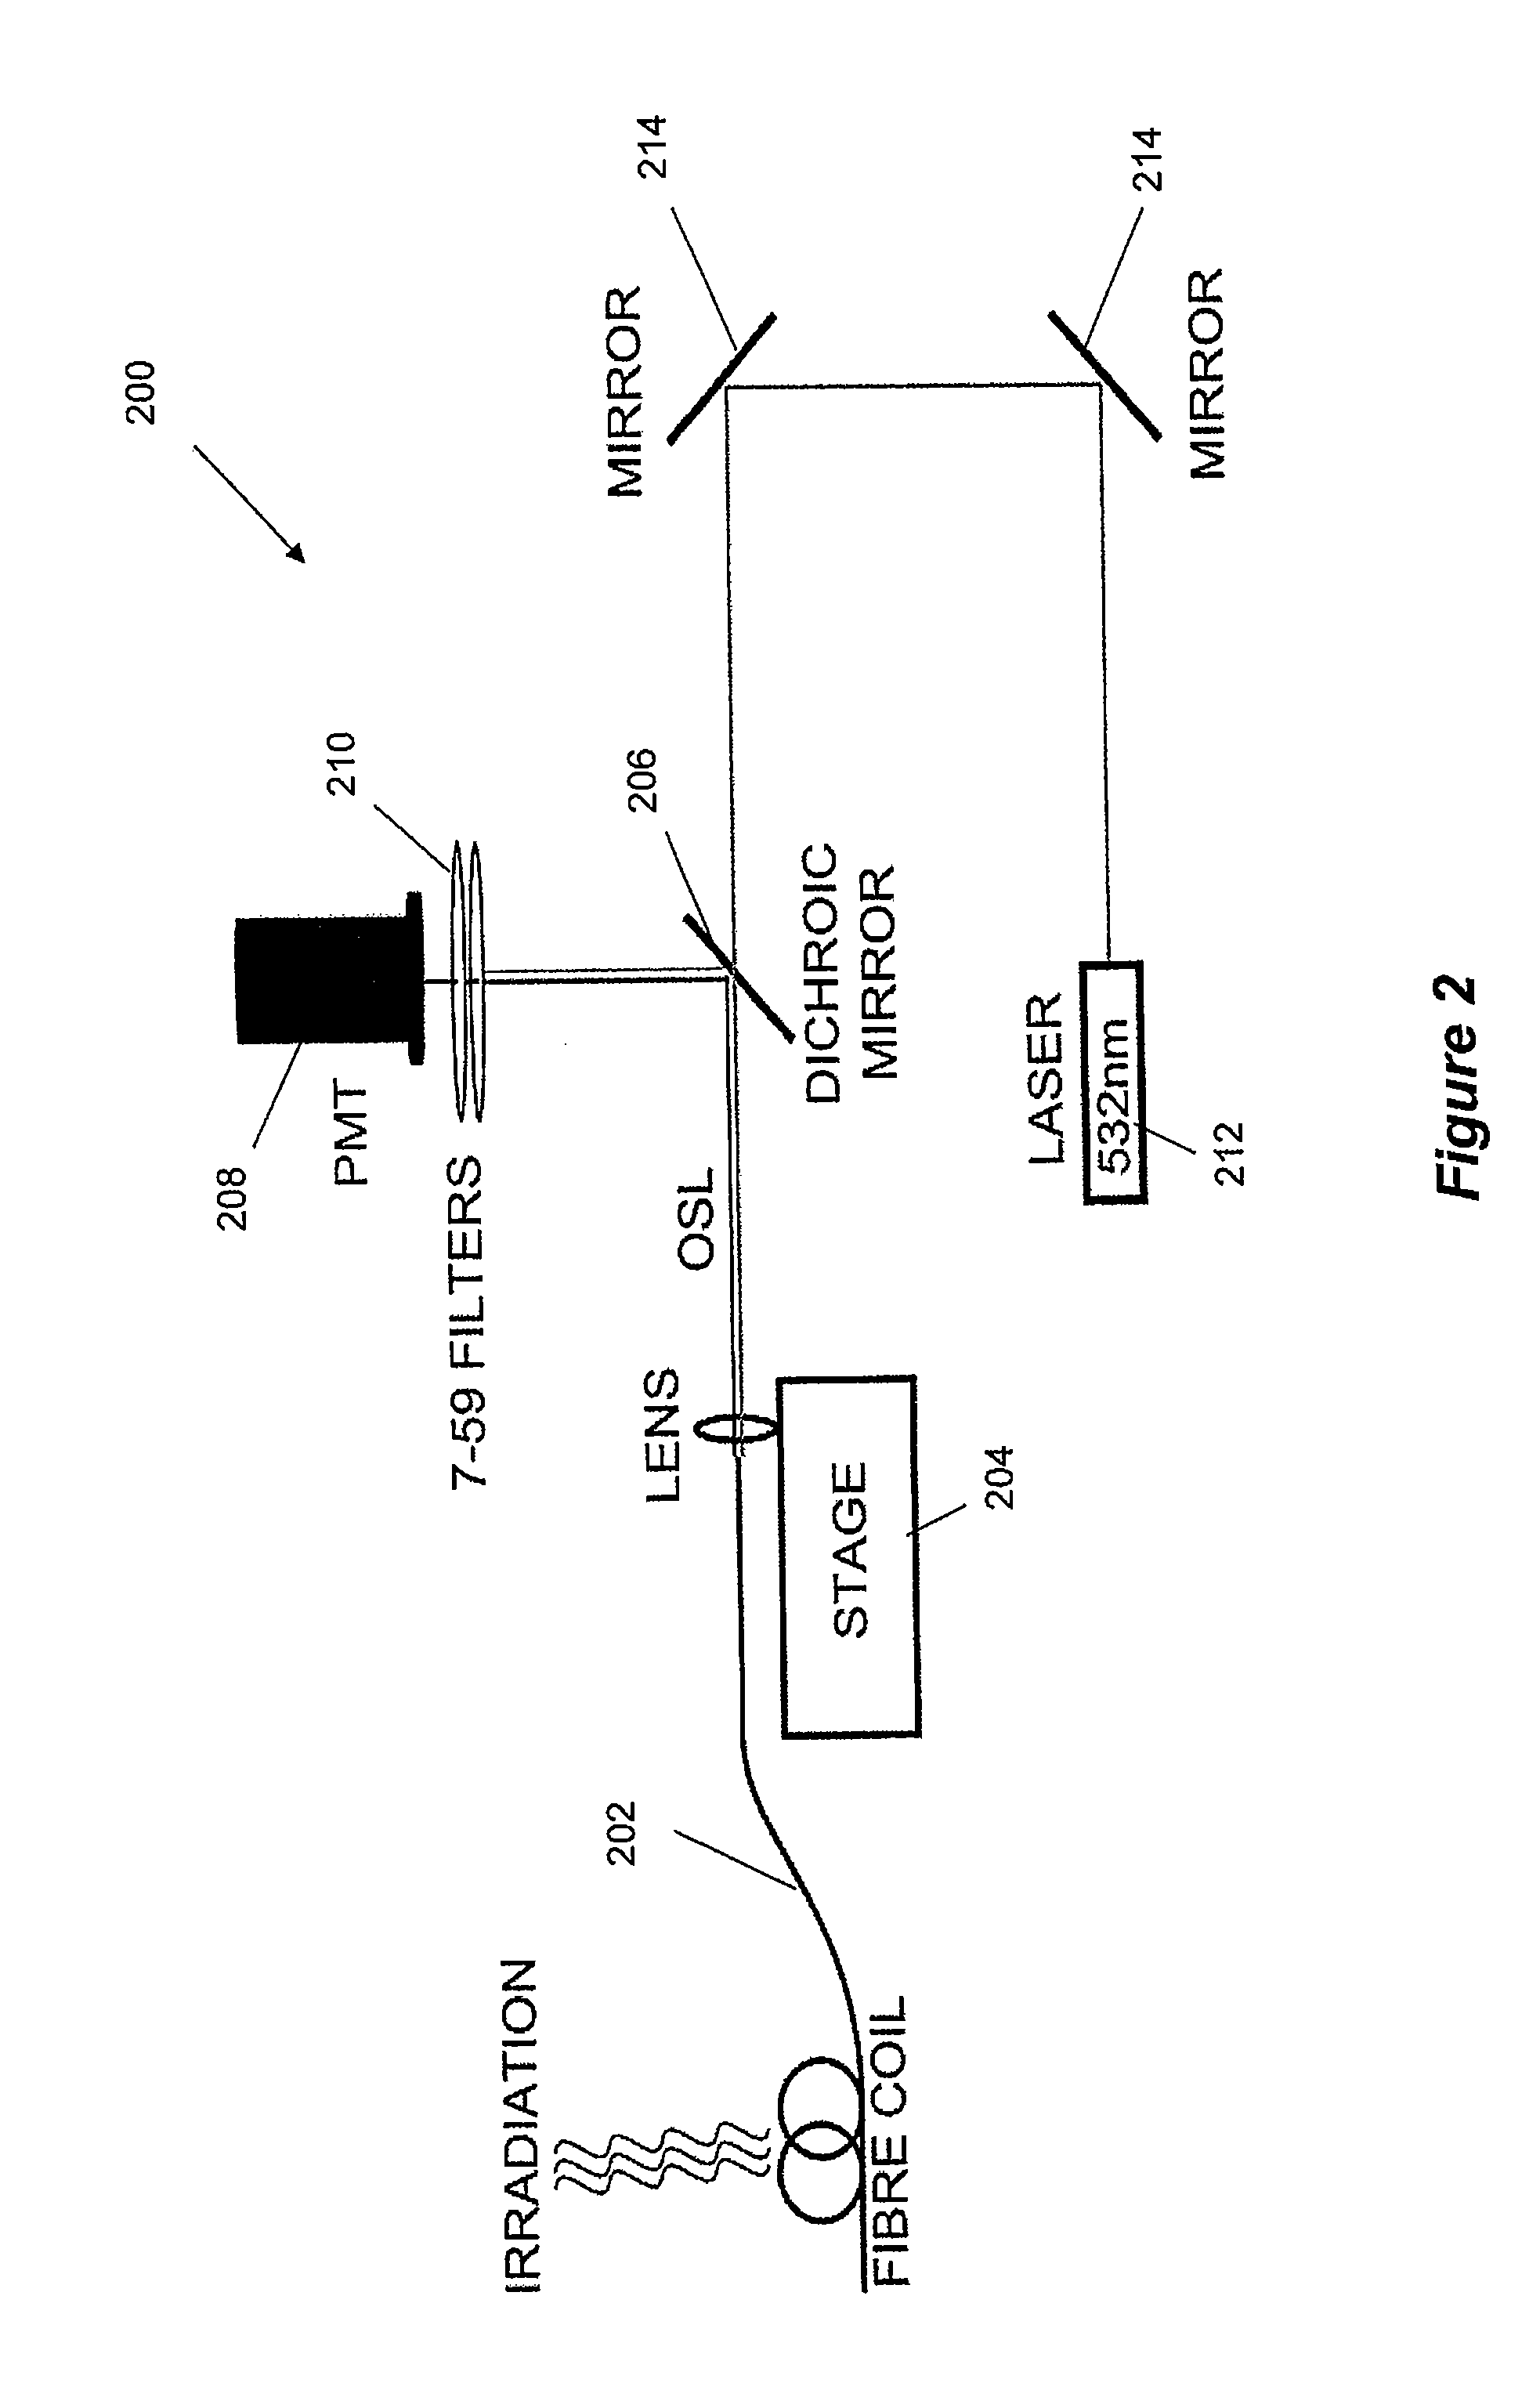 Optical detector for detecting radiation